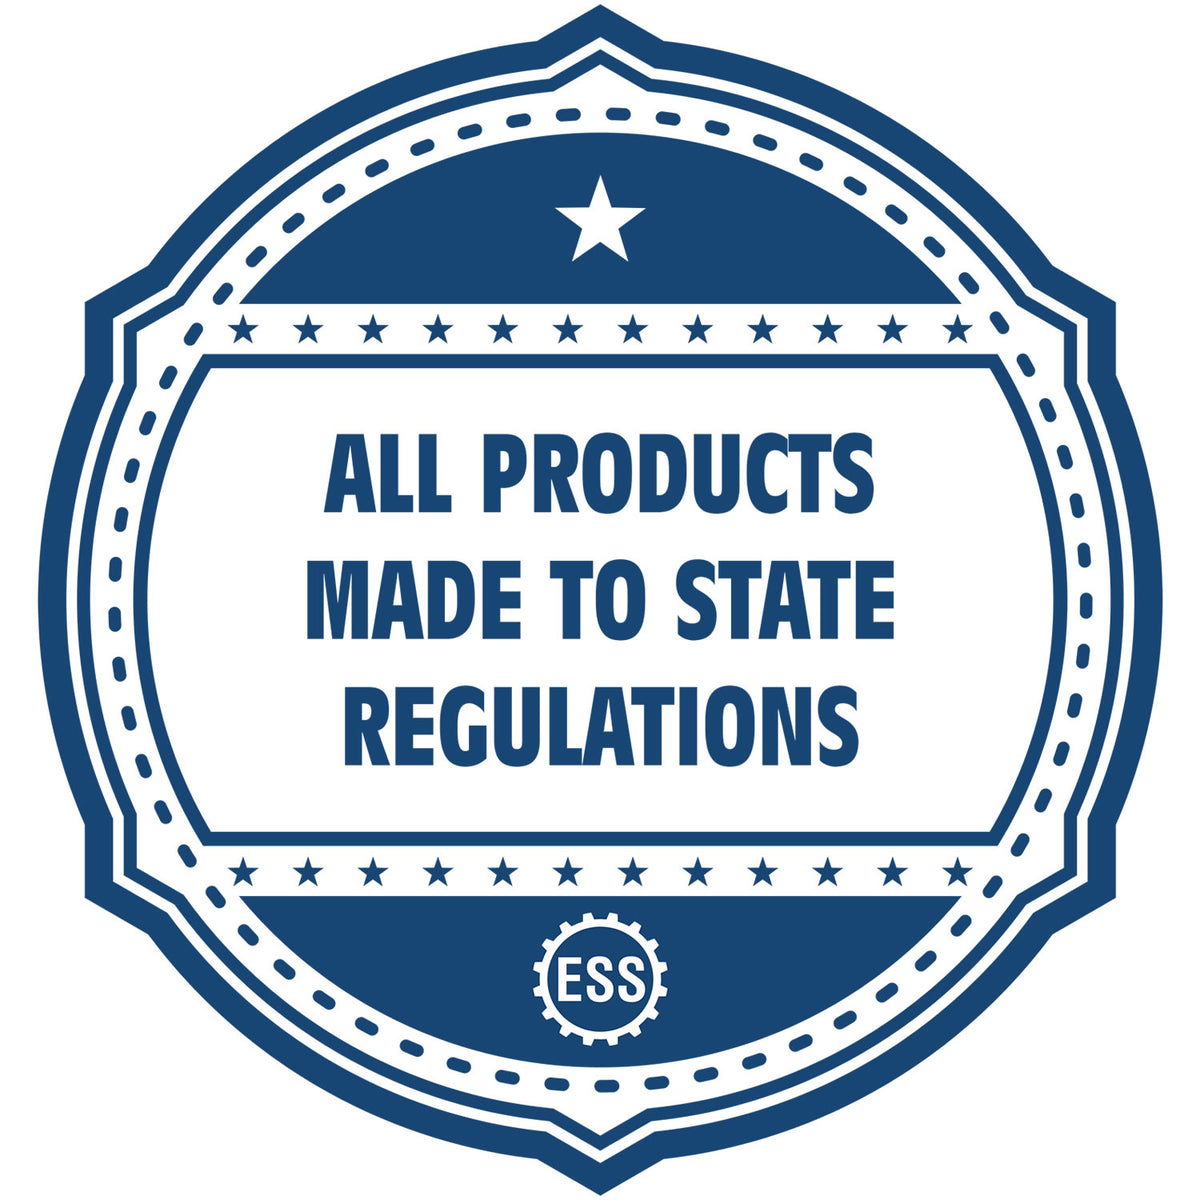 An icon or badge element for the Premium MaxLight Pre-Inked Ohio Engineering Stamp showing that this product is made in compliance with state regulations.